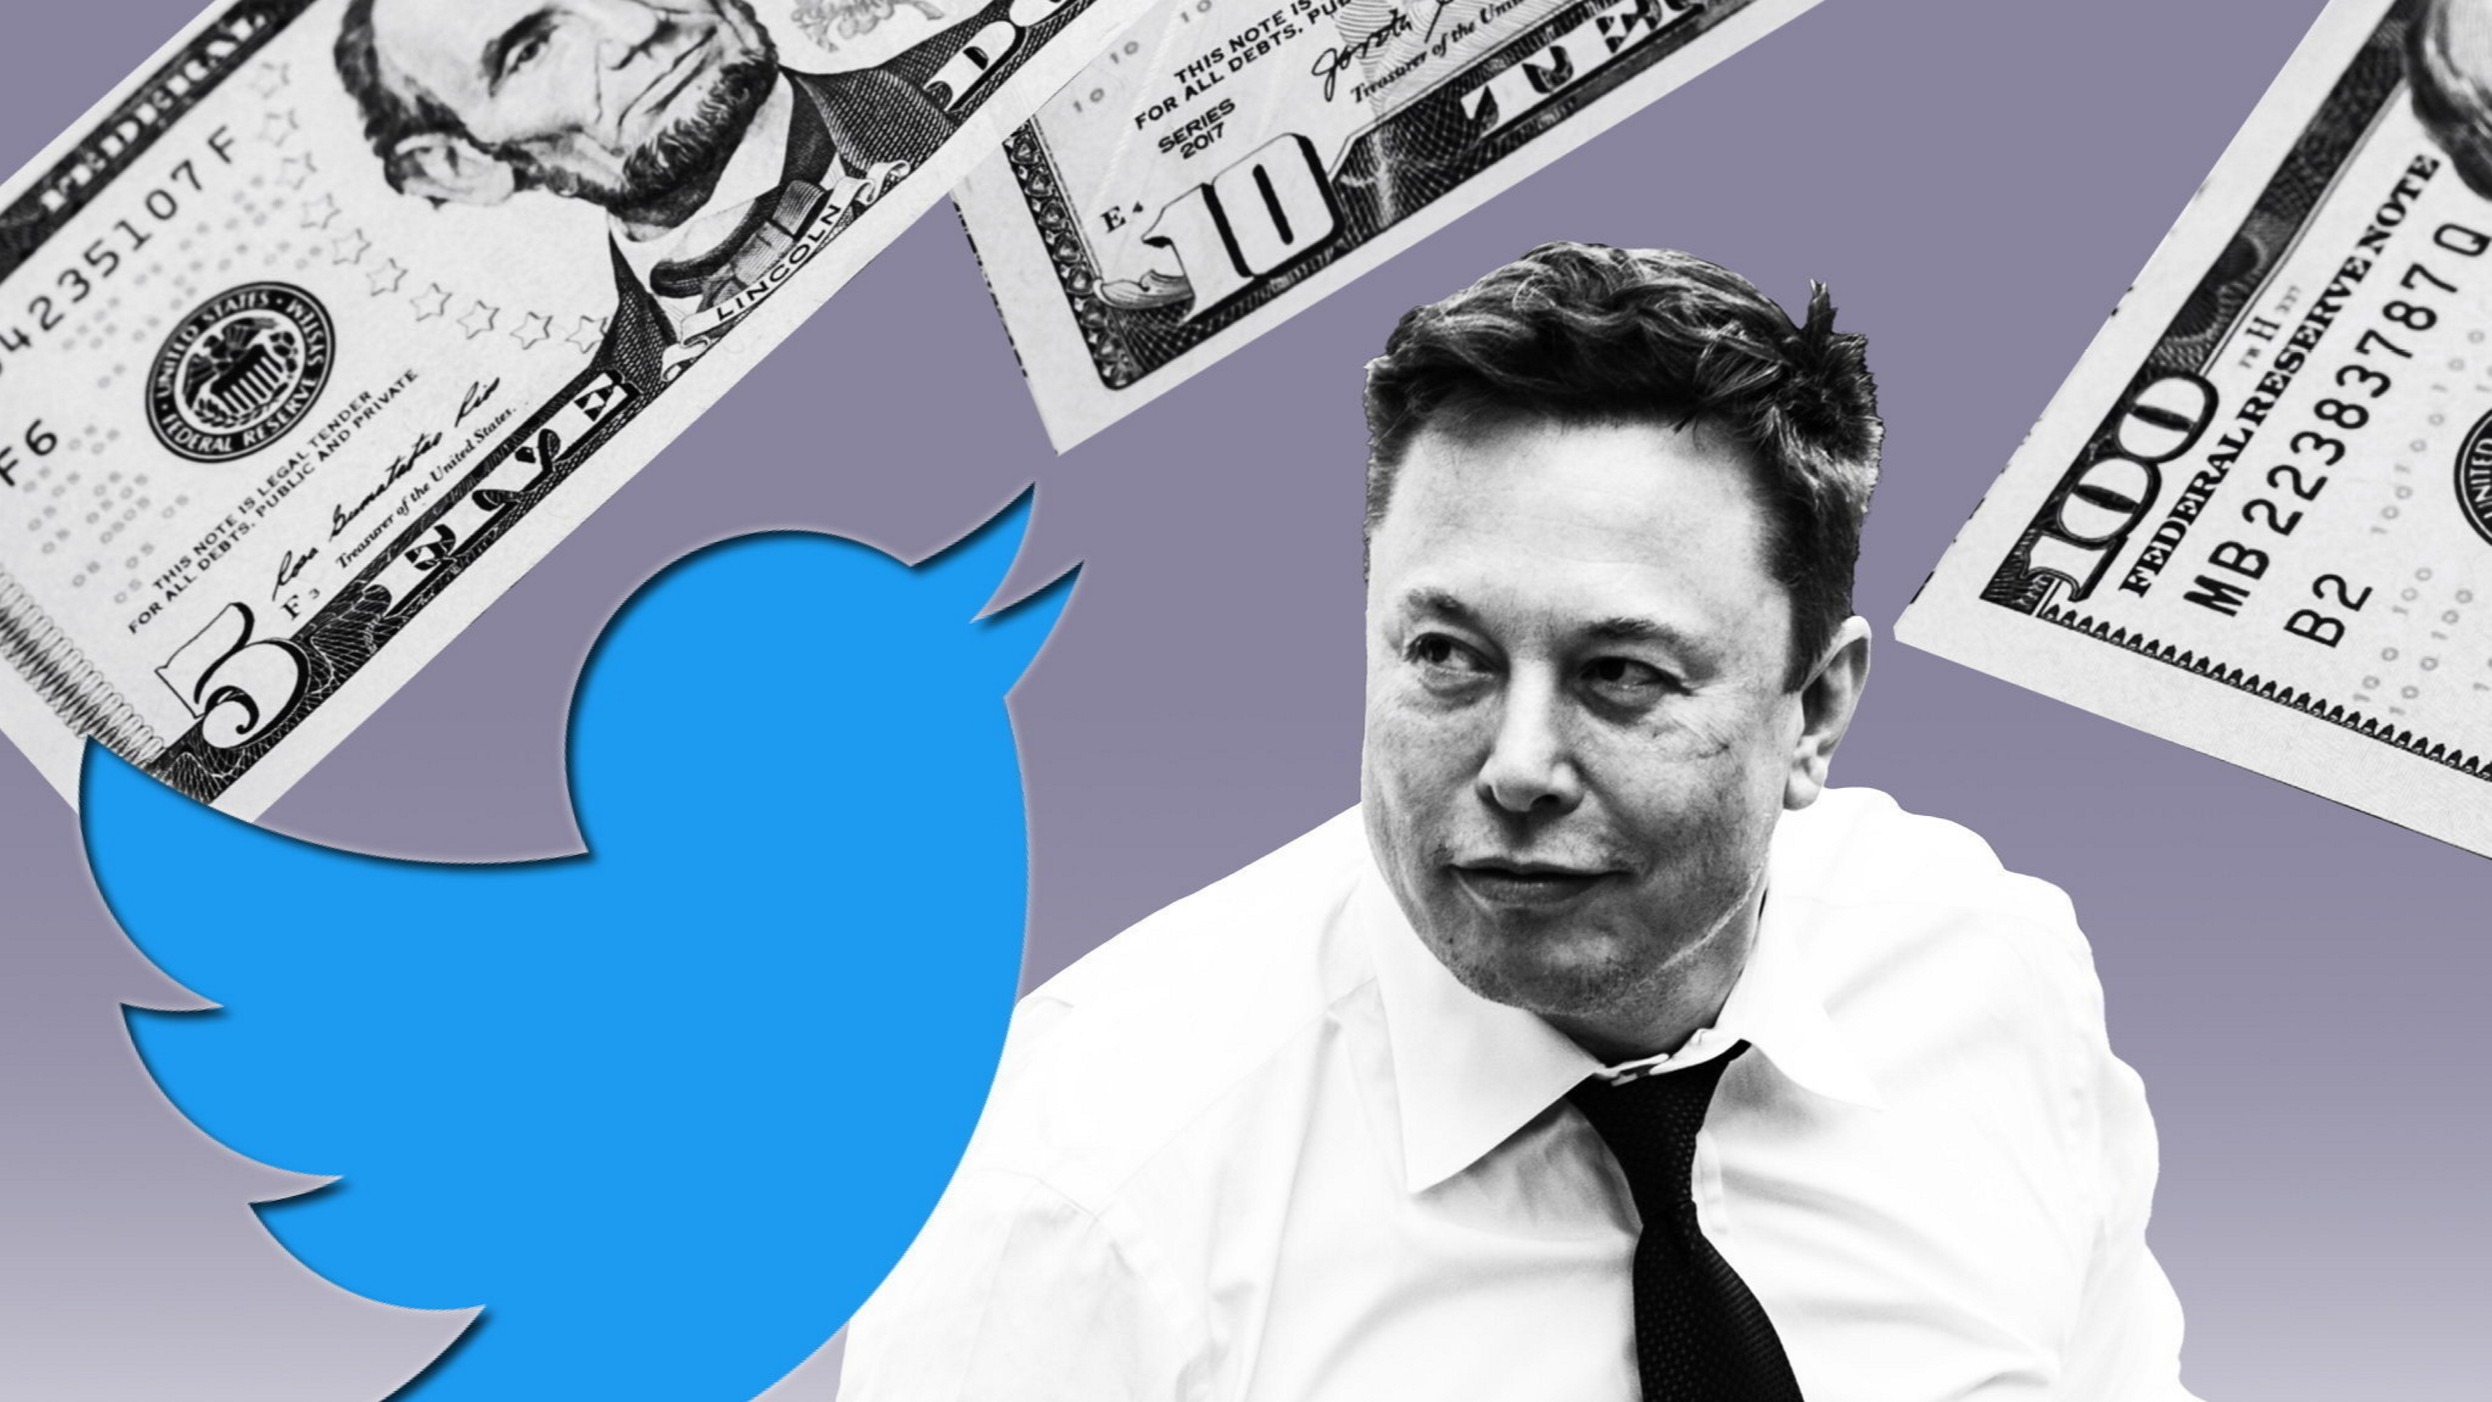 Looming Twitter interest payment leaves Elon Musk with unpalatable options  